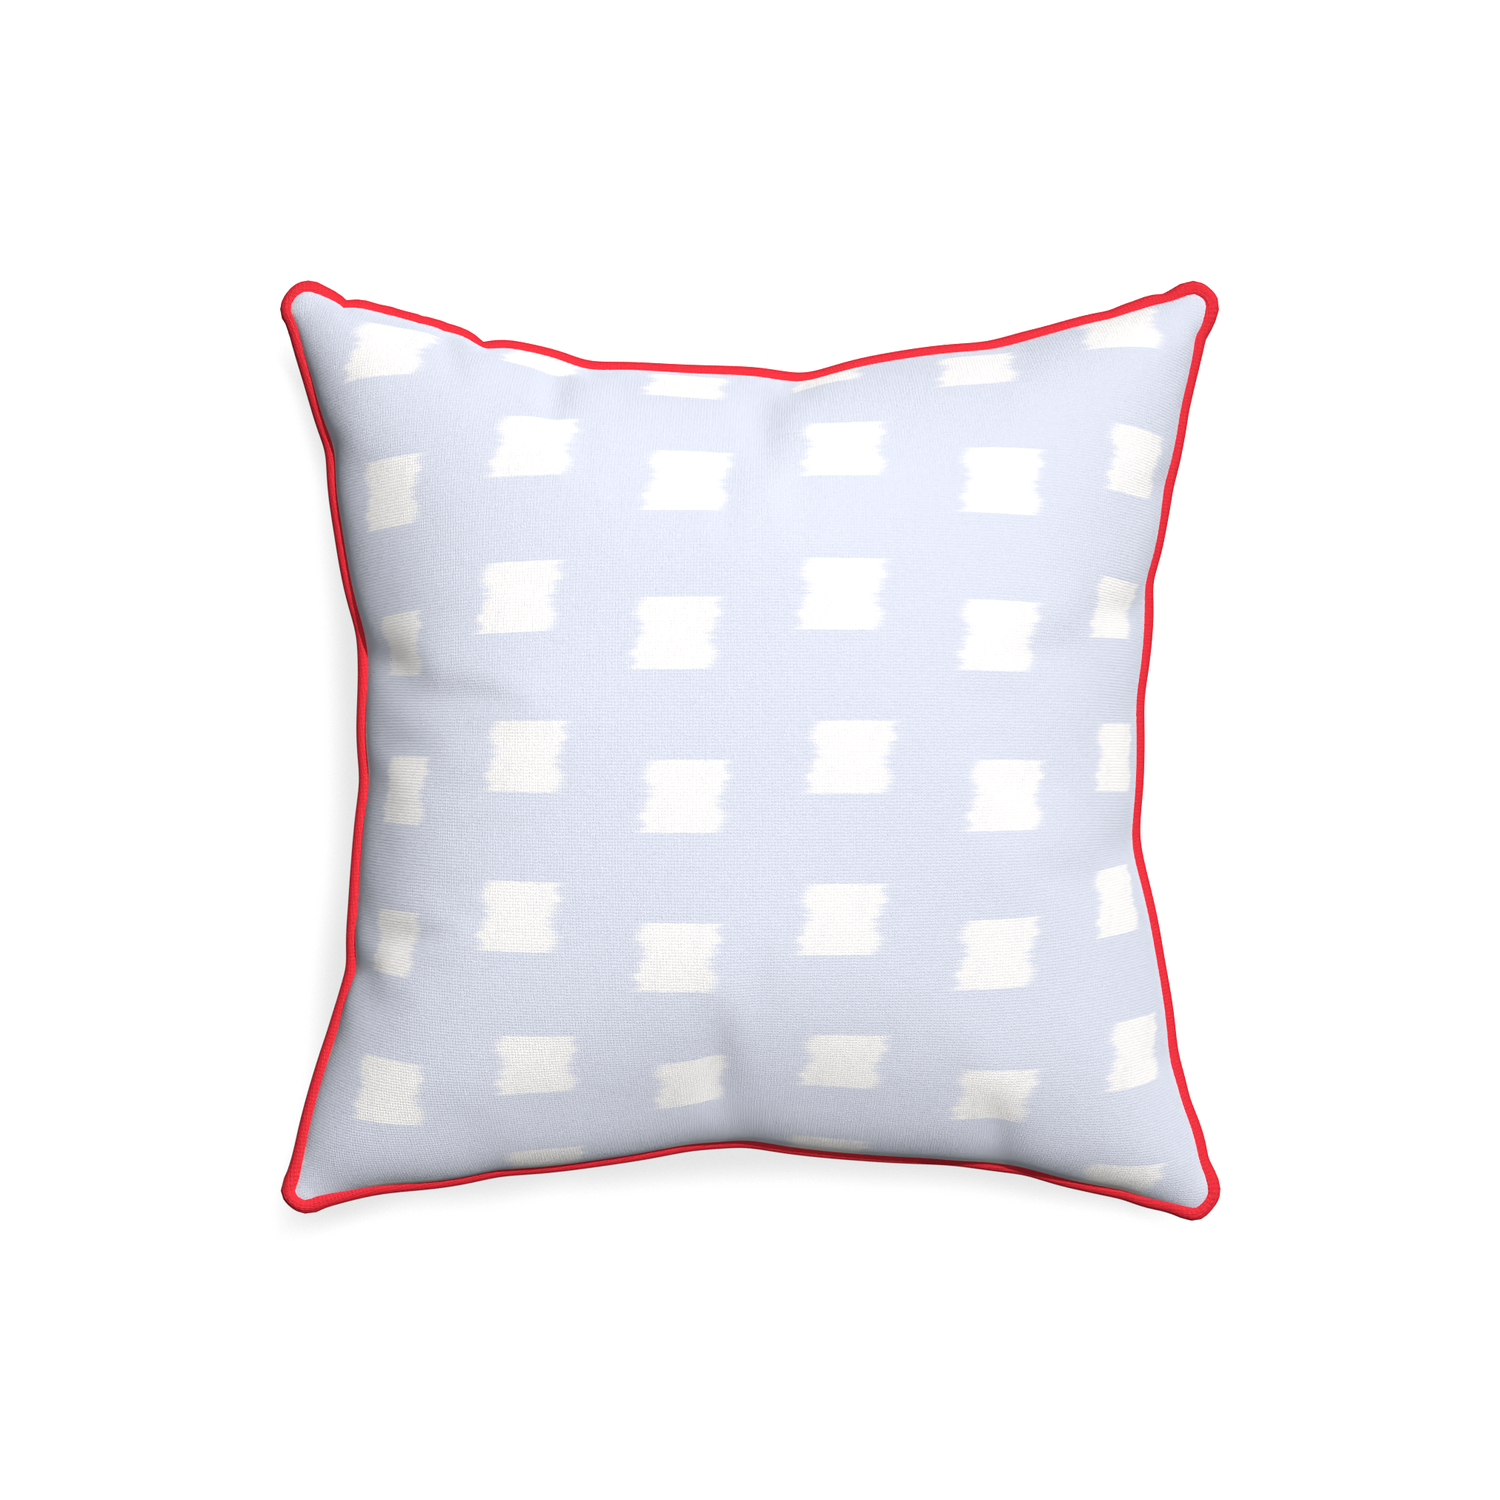 20-square denton custom sky blue patternpillow with cherry piping on white background